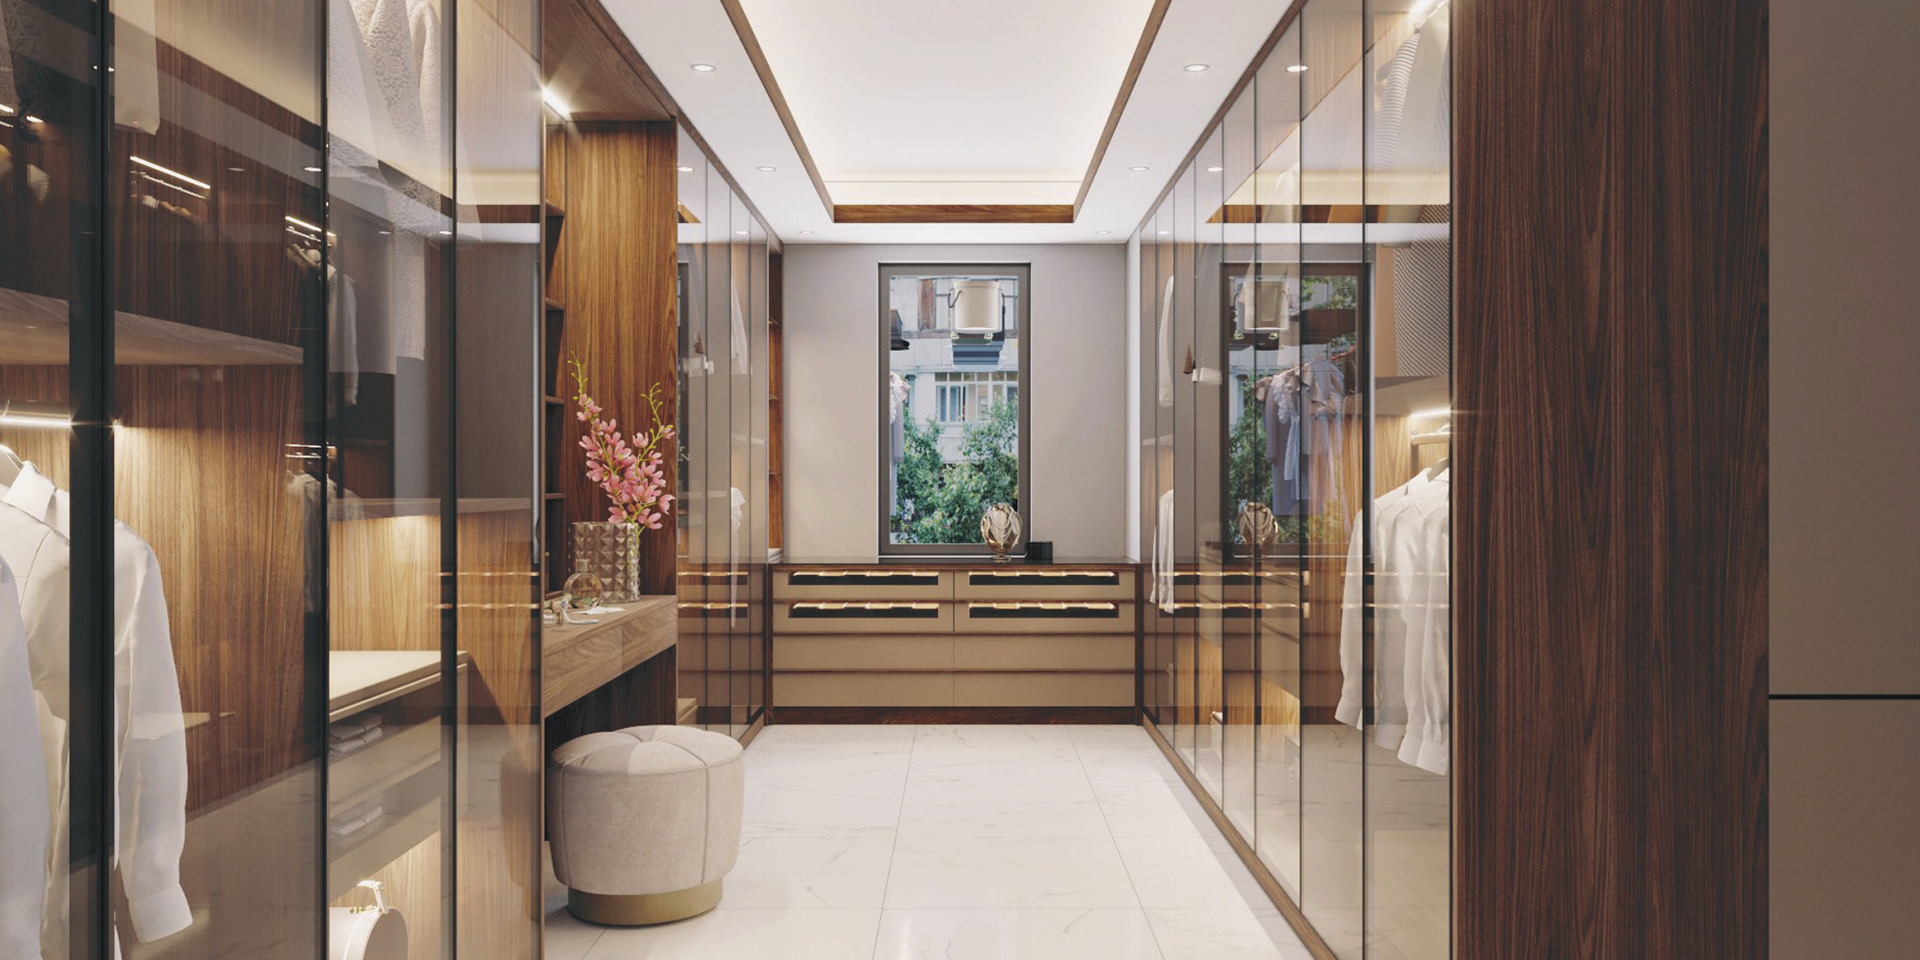 Dressing room – the most used space in the villas